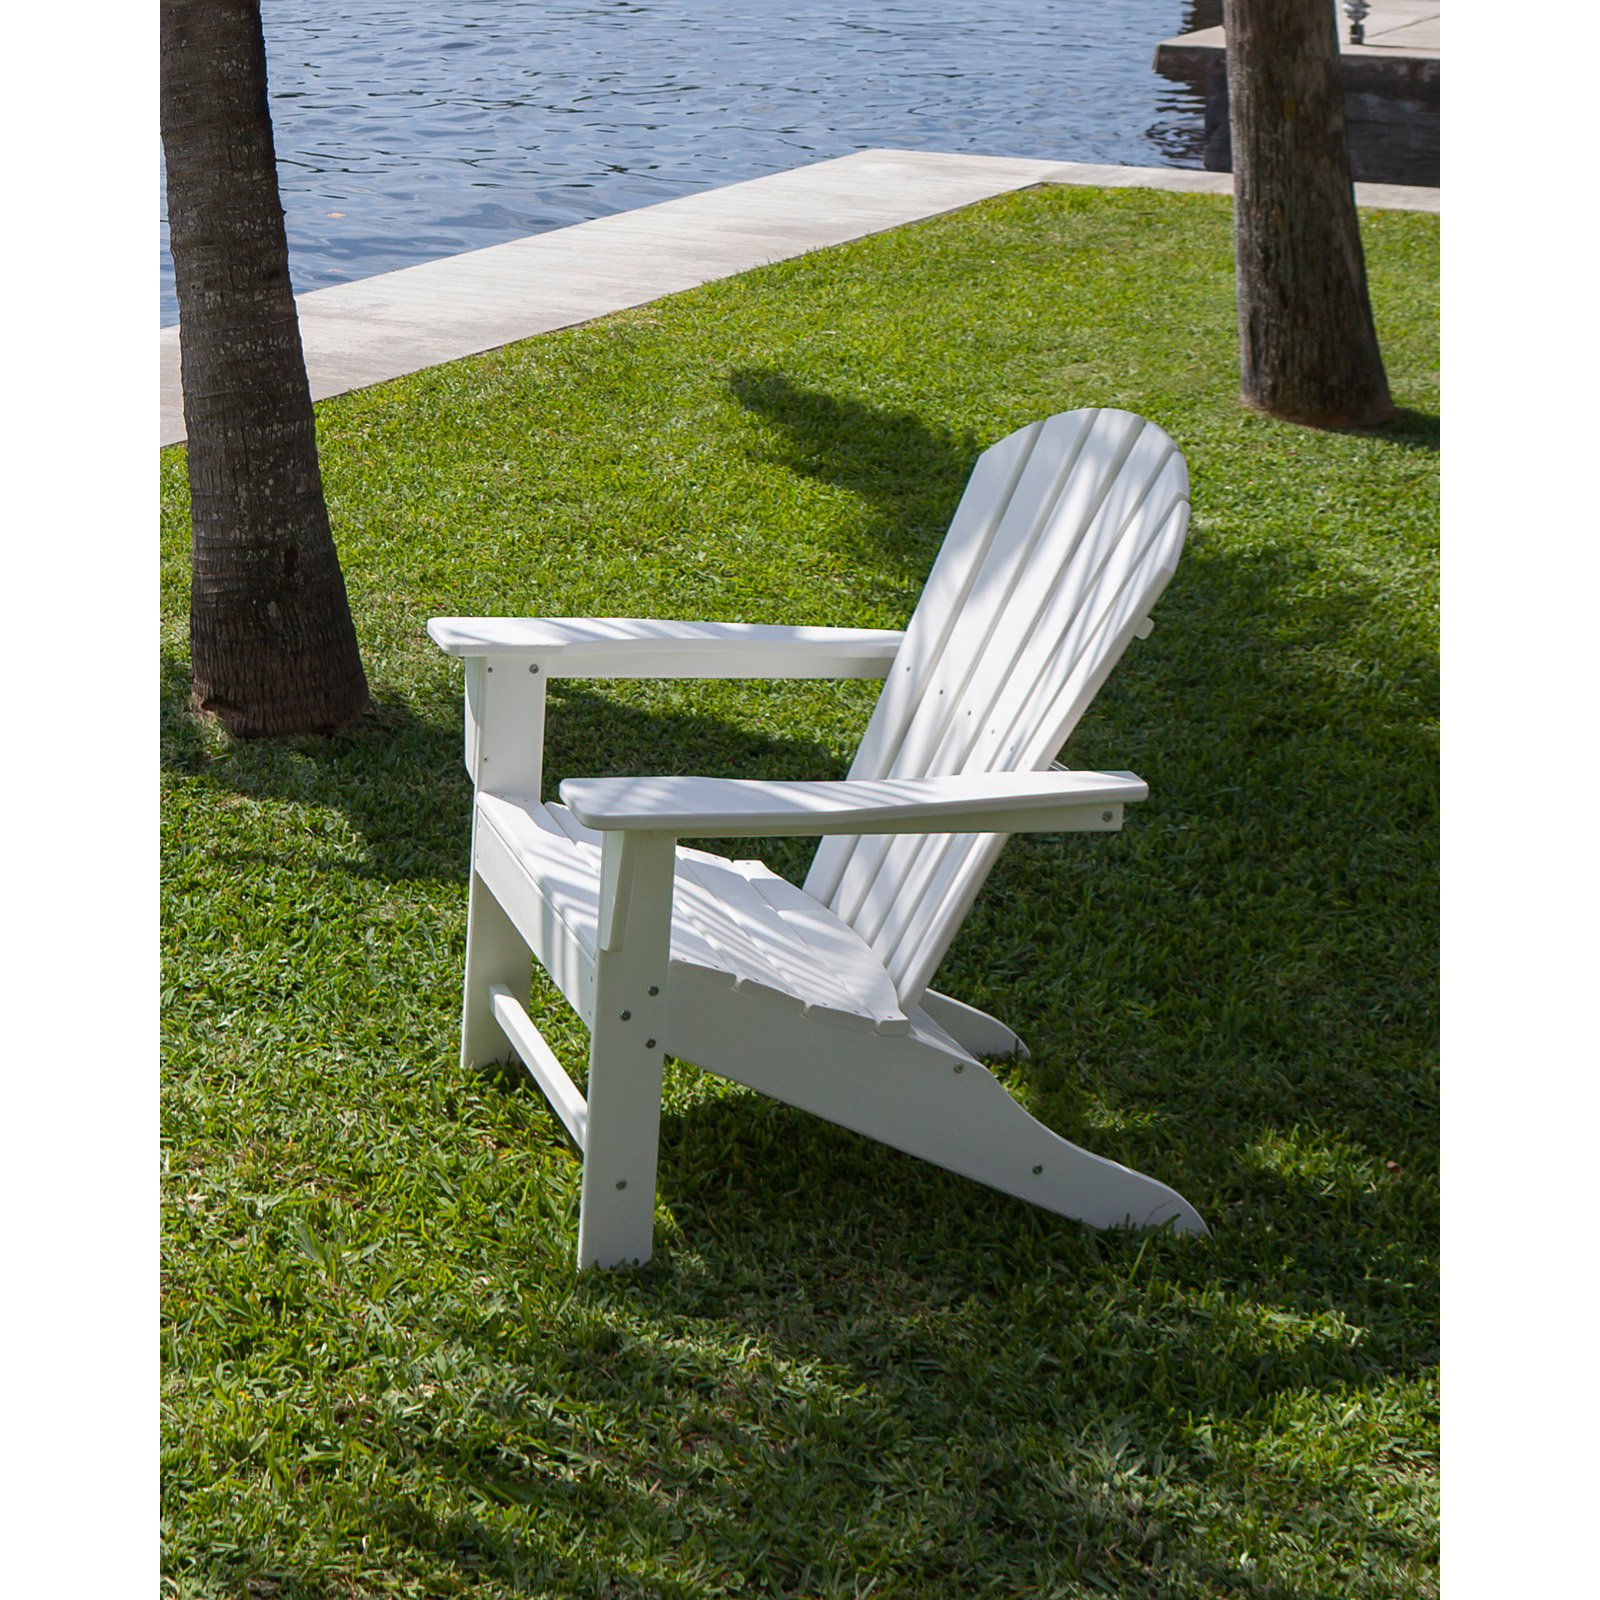 POLYWOOD&reg; South Beach Recycled Plastic Adirondack Chair - image 3 of 11